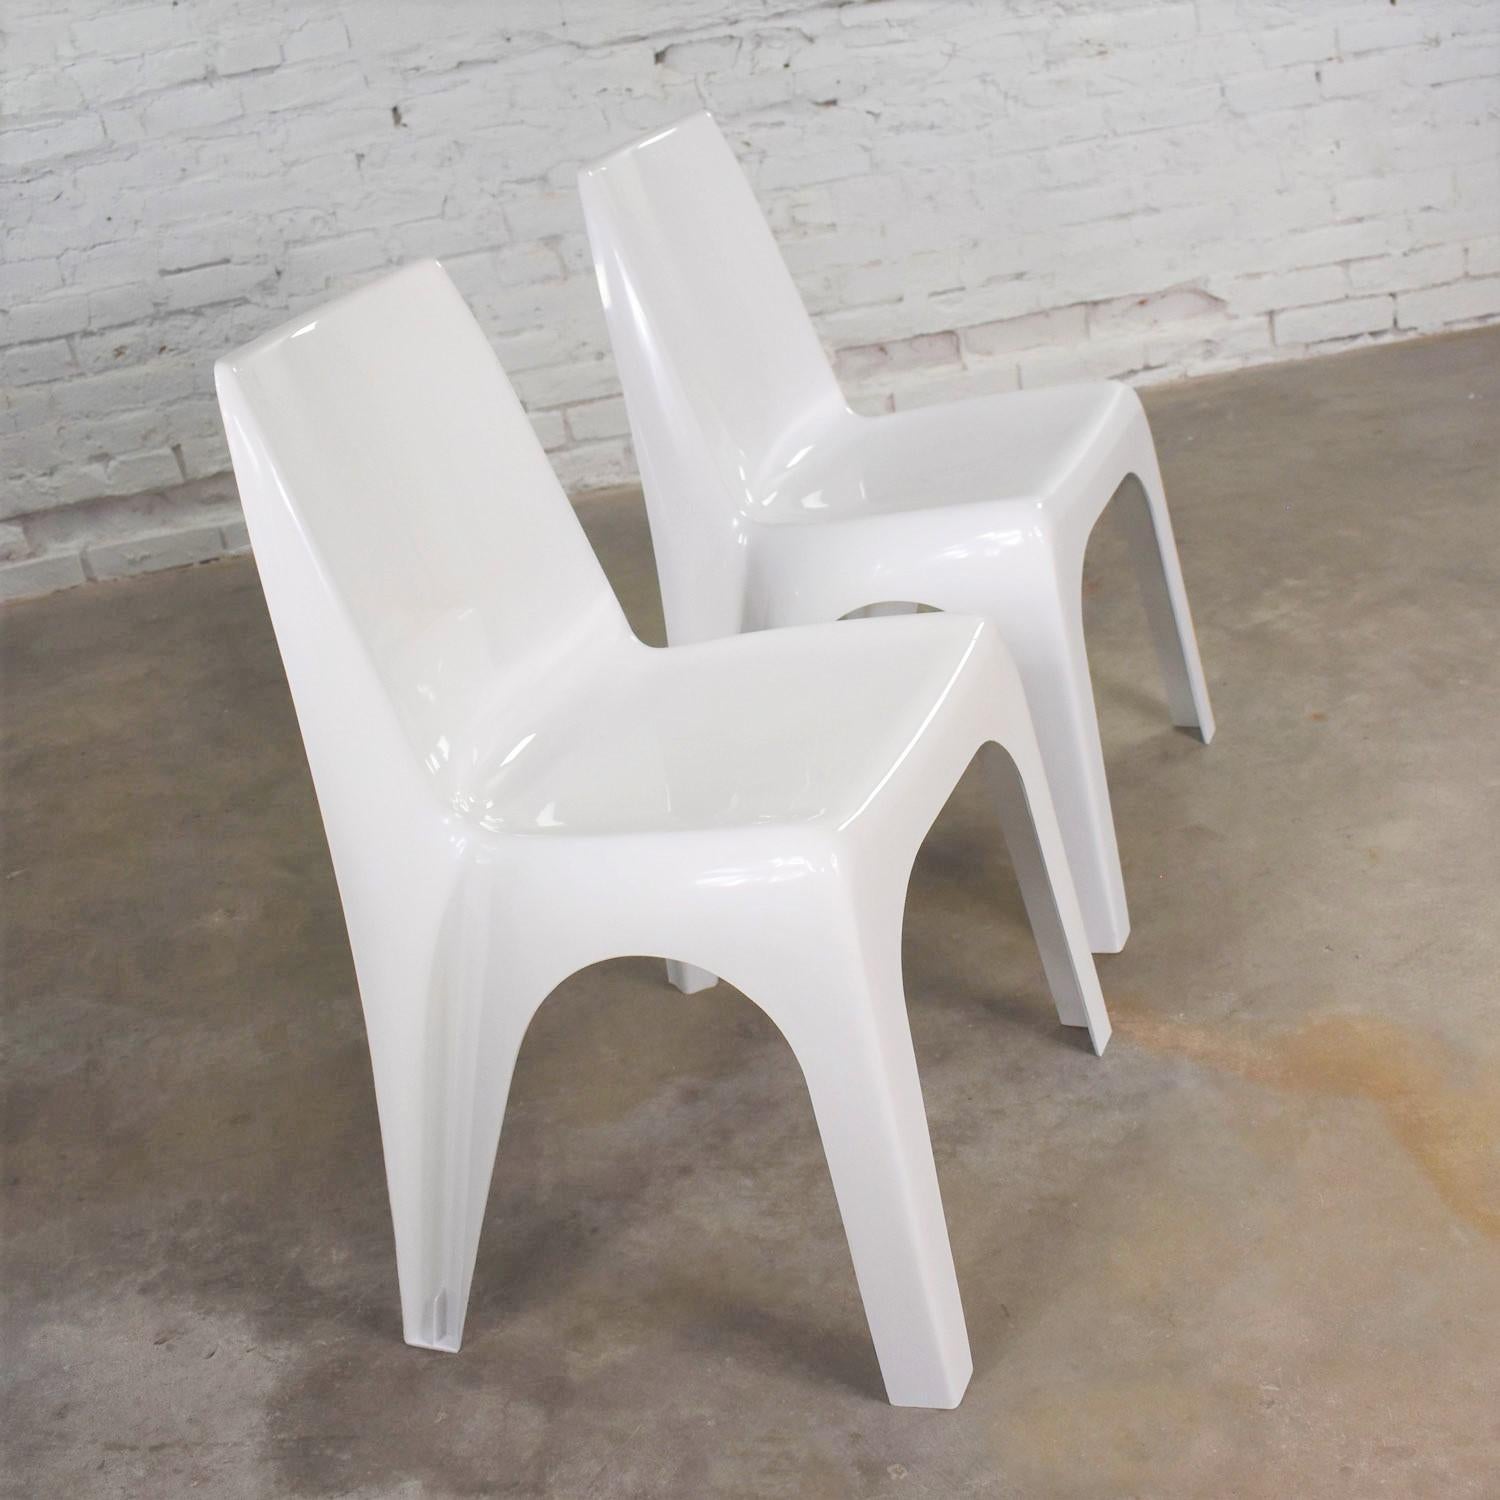 Handsome vintage pair of modern white molded plastic chairs in the style of Kartell’s 4850 chair designed by Giorgina Castiglioni, Geiorgio Gaviraghi, and Aldo Lanza. These are marked USA Patent Pending. They are in wonderful vintage condition. They